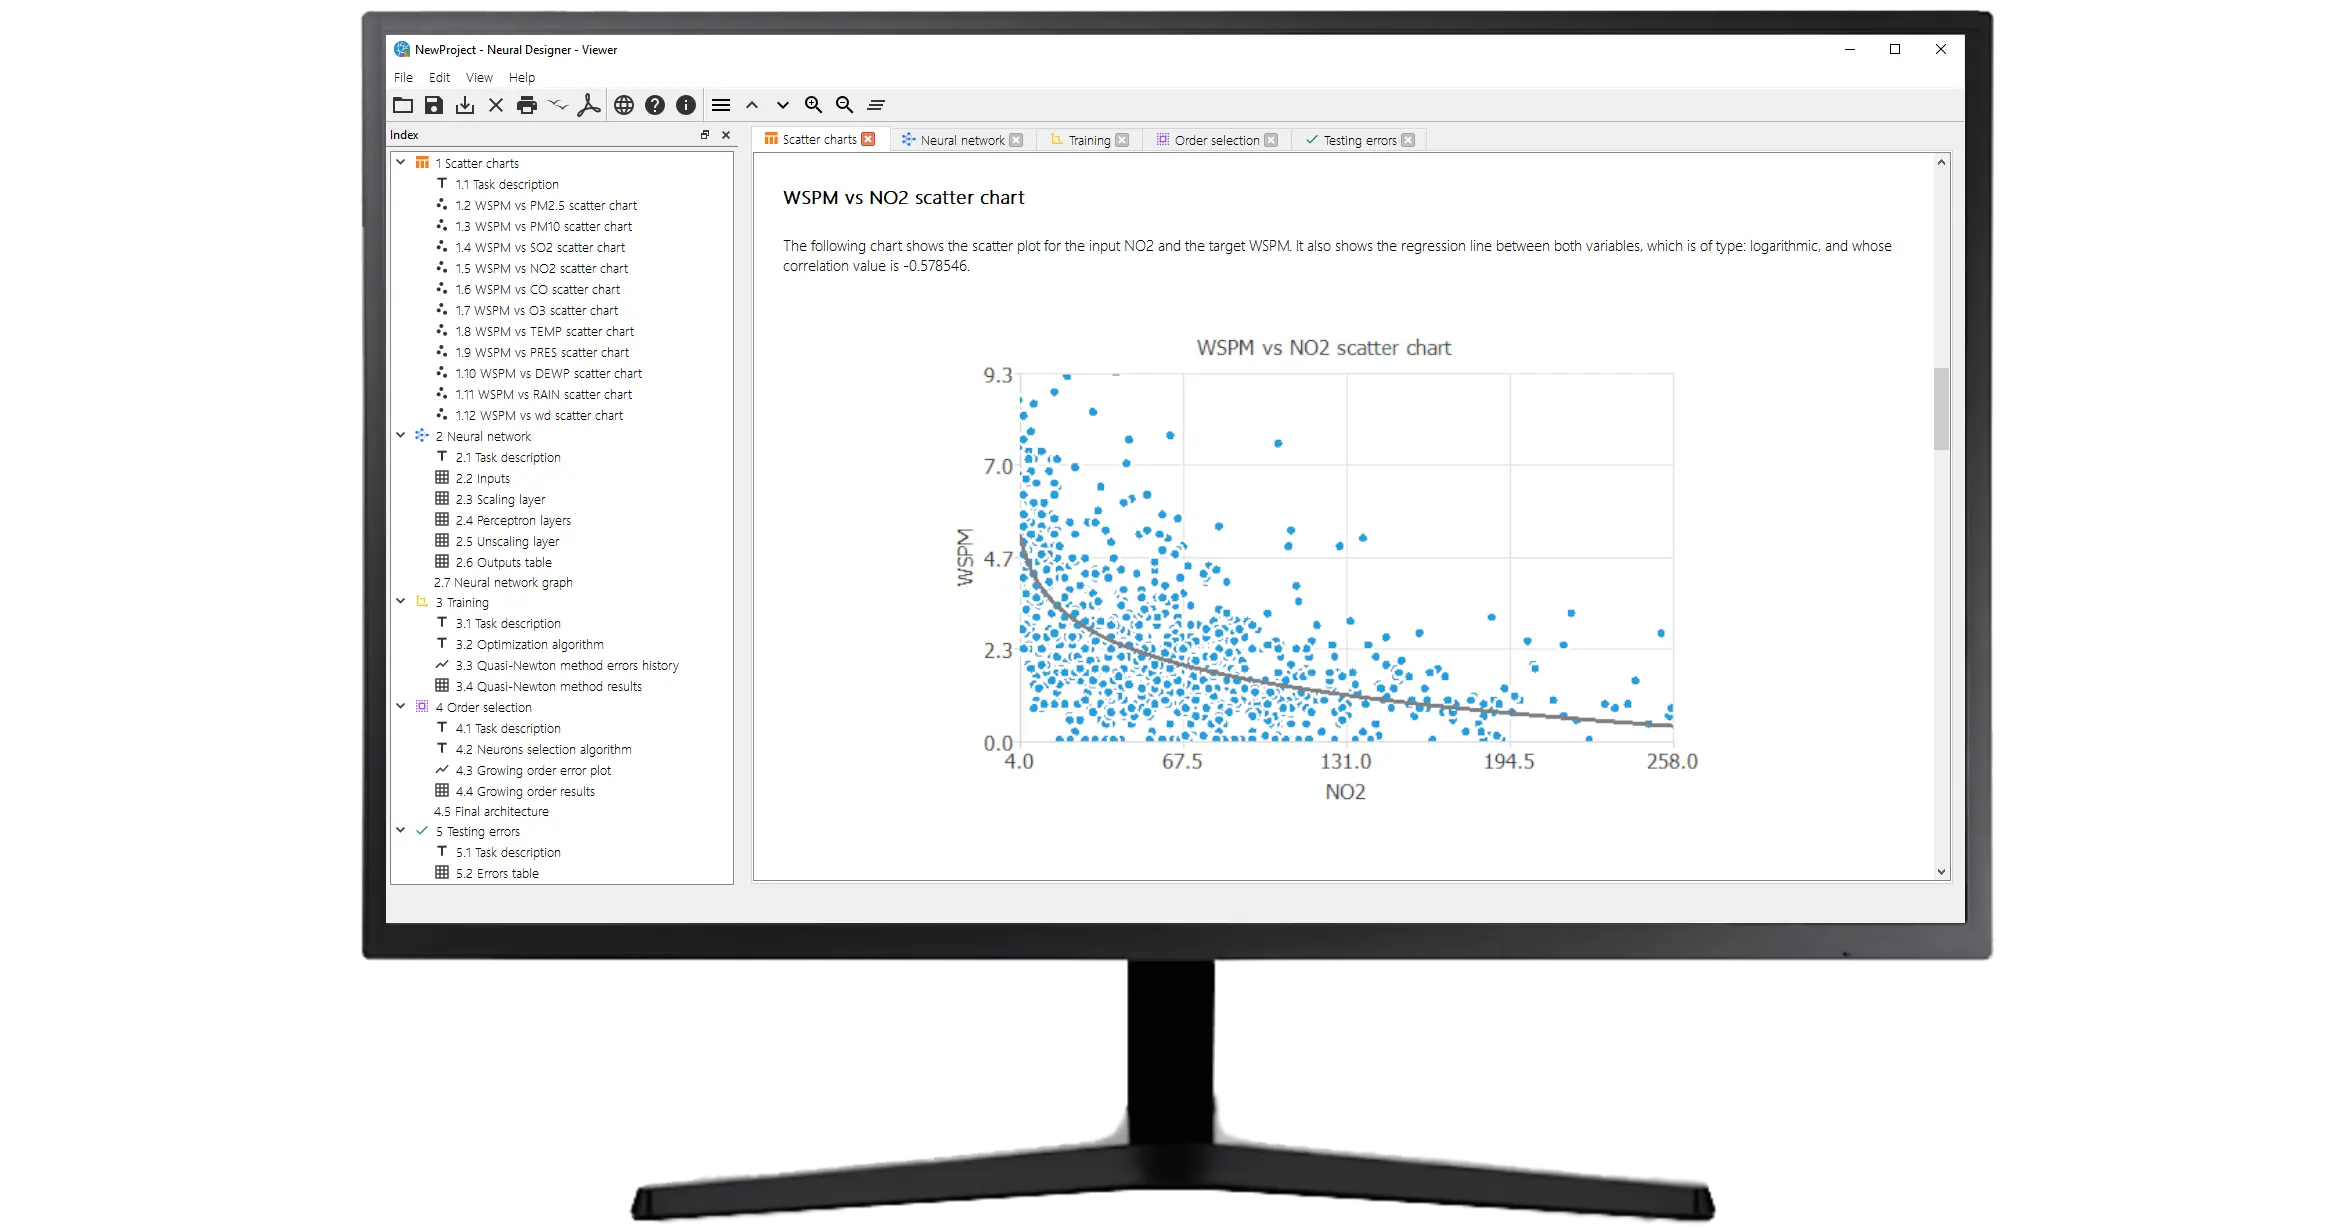 Visualize the results in tables, charts and graphs with Neural Designer